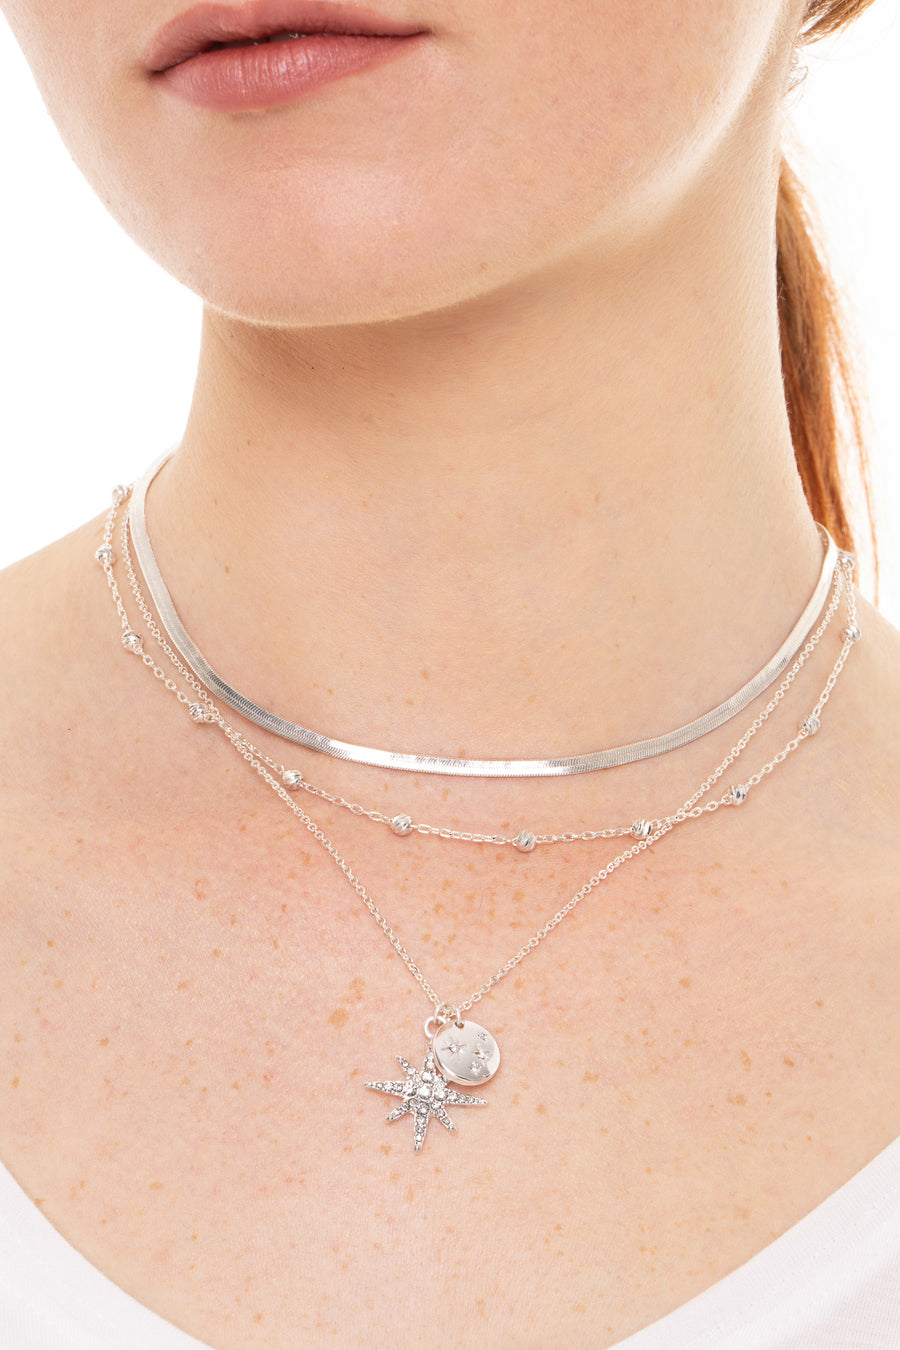 Star layered silver necklace chain 